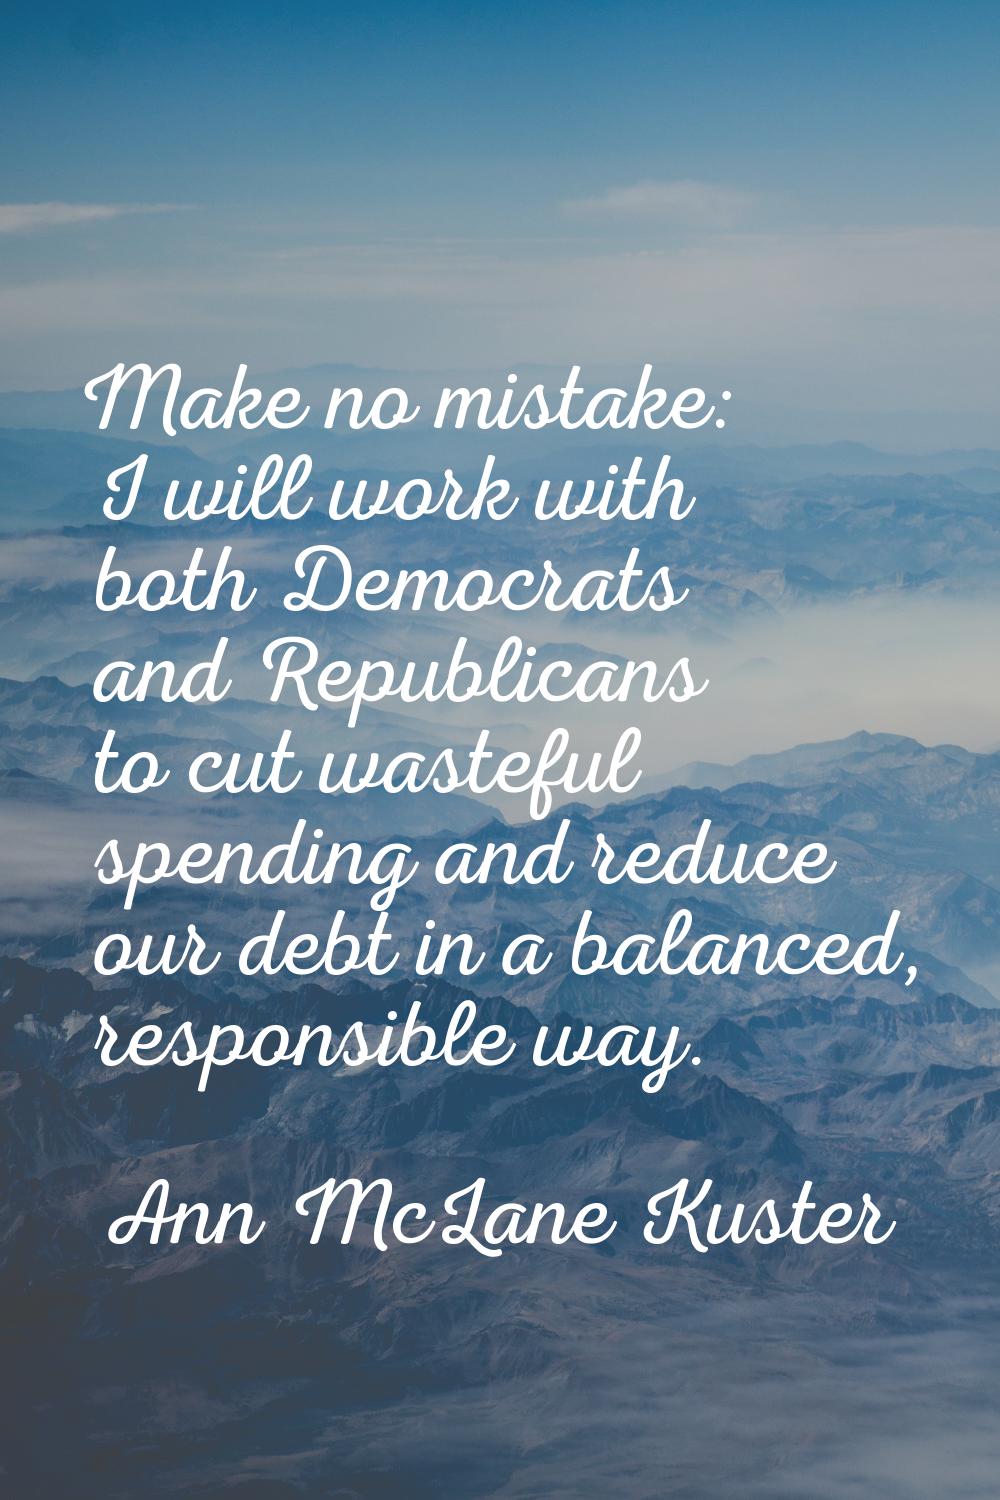 Make no mistake: I will work with both Democrats and Republicans to cut wasteful spending and reduc